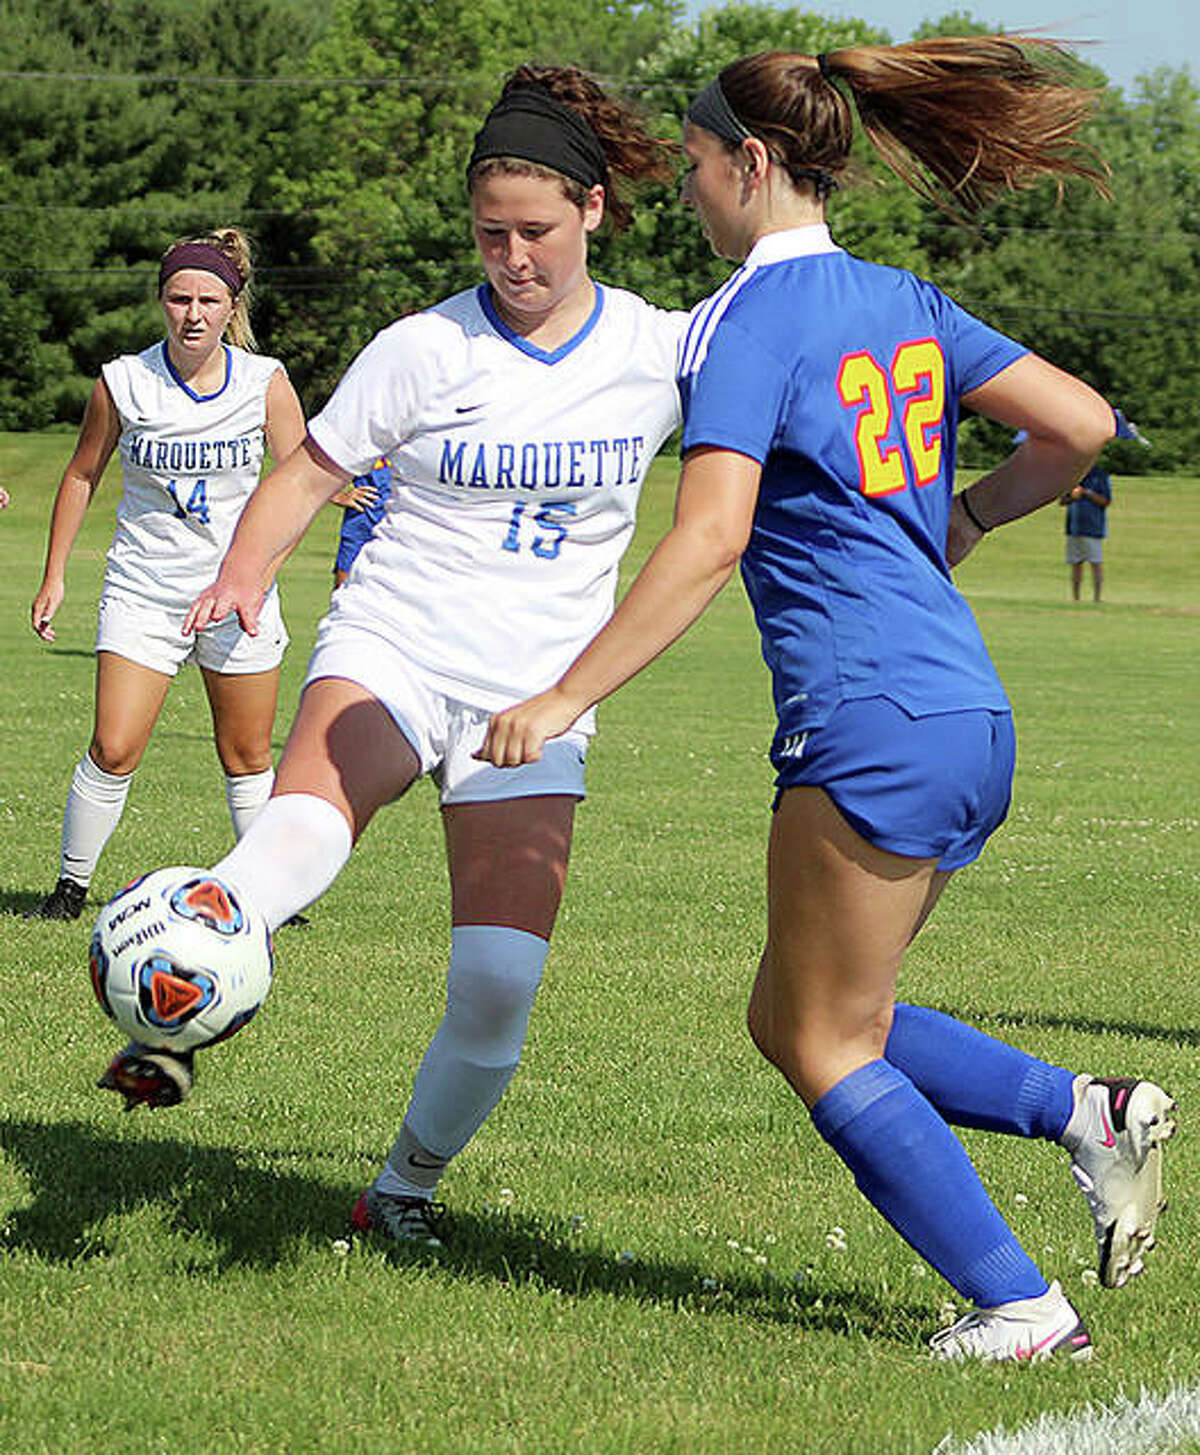 Madelyn Smith of Marquette (15) controls the ball in last week’s sectional championship game.